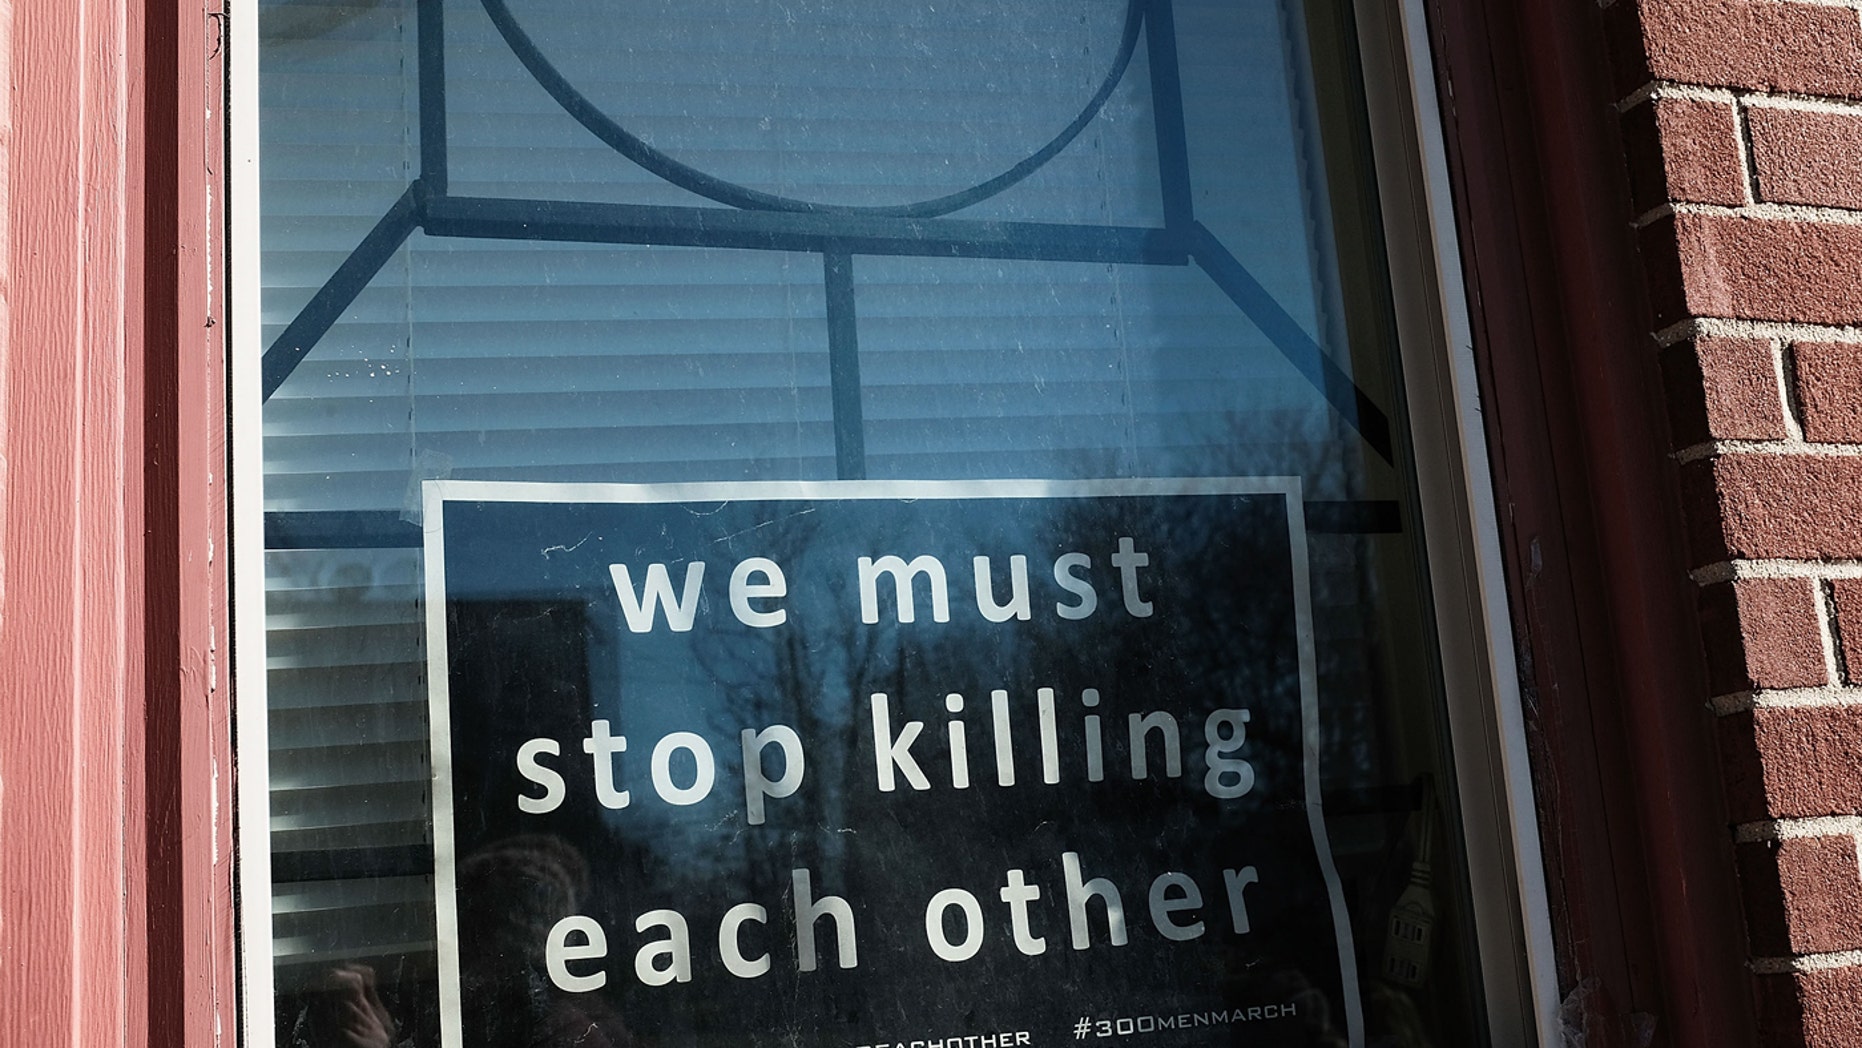 BALTIMORE, MD - FEBRUARY 03: A sign to end violence sits in a window in a neighborhood with a high murder rate on February 3, 2018 in Baltimore, Maryland. 